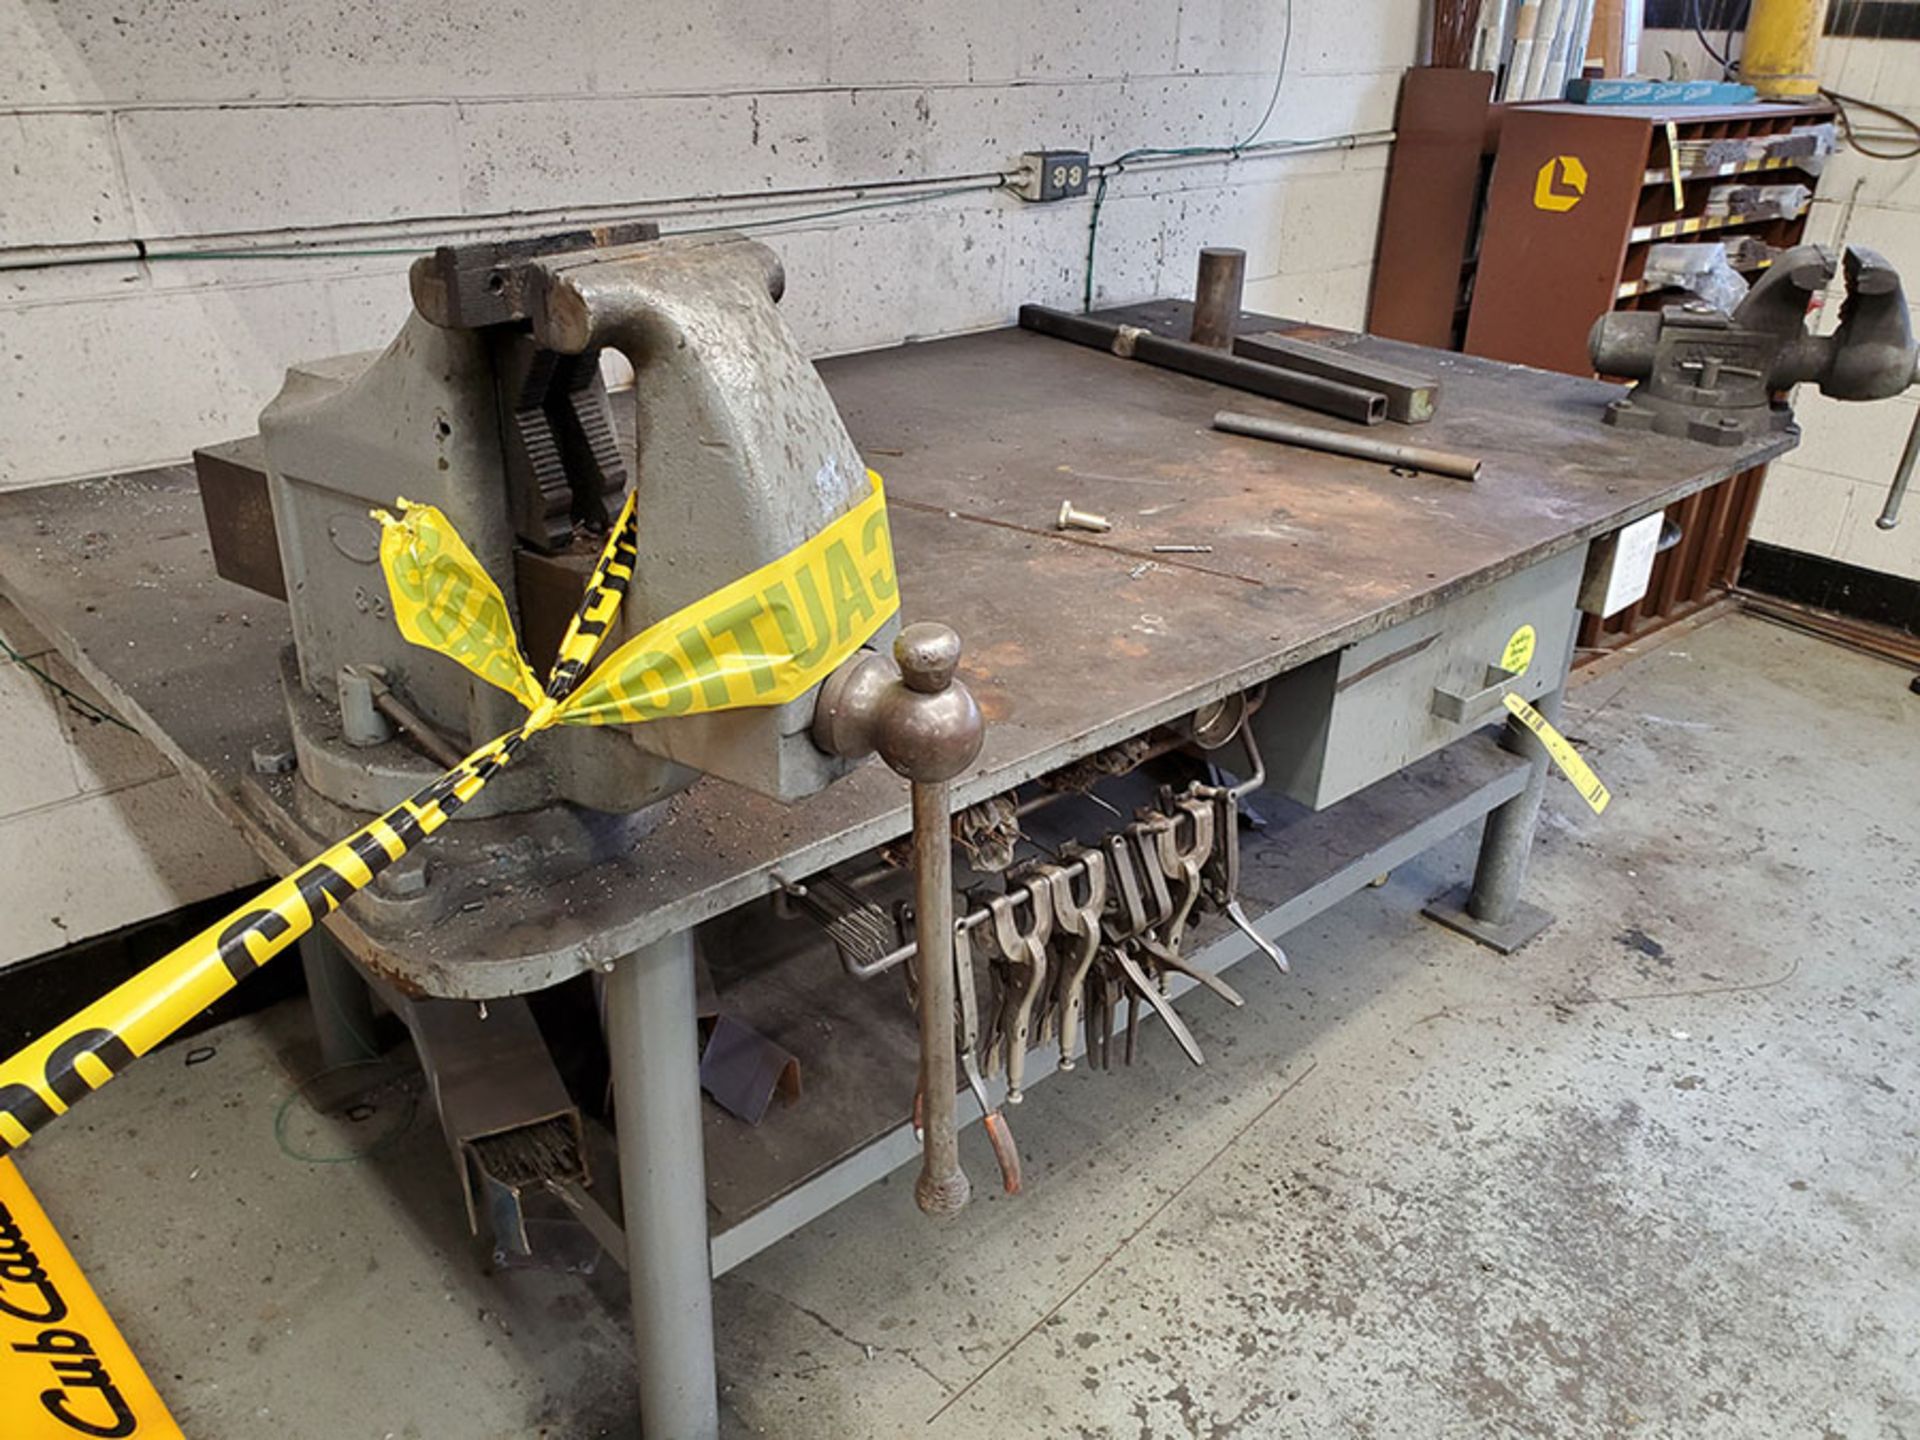 WELDING TABLE 4' X 7' X 1'' WITH L-3 STARRETT ATHOL VISE 326 AND 6 1/2'' JAW VISE - Image 2 of 5